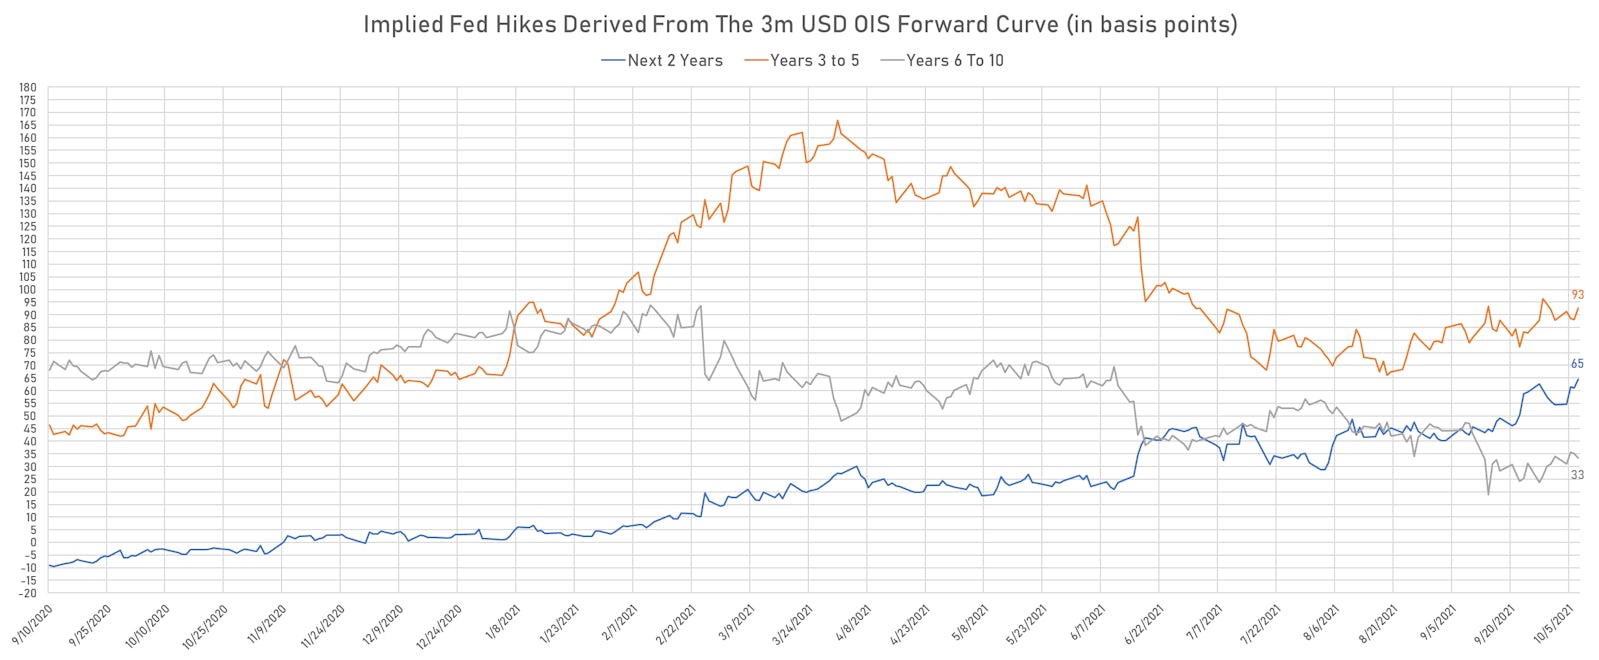 Implied Fed Hikes Derived From the 3-month USD OIS Forward Curve | Sources: ϕpost, Refinitiv data